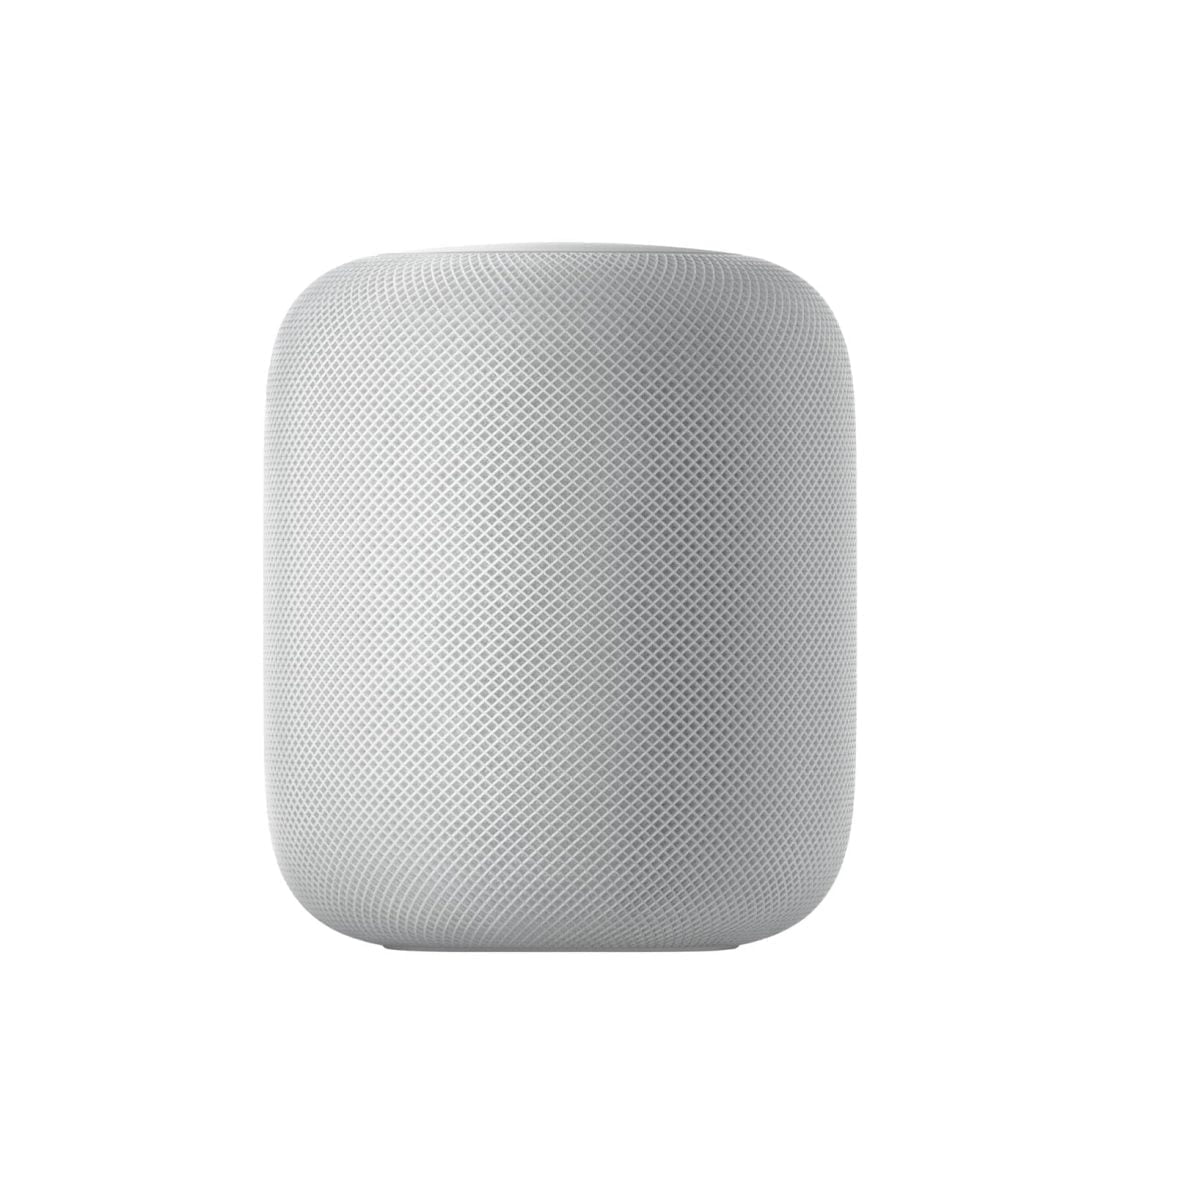 5902411 Sd Apple &Amp;Lt;P Class=&Amp;Quot;Hero-Intro Typography-Intro-Elevated Transition-2&Amp;Quot;&Amp;Gt;Homepod Is A Breakthrough Speaker That Adapts To Its Location And Delivers High-Fidelity Audio Wherever It’s Playing. Together With Apple Music And Siri, It Creates An Entirely New Way For You To Discover And Interact With Music At Home. And It Can Help You And Your Whole Family With Everyday Tasks — And Control Your Smart Home — All With Just Your Voice.&Amp;Lt;/P&Amp;Gt; &Amp;Lt;Strong&Amp;Gt;One Year International Apple Warranty&Amp;Lt;/Strong&Amp;Gt; Requires Iphone Se, Iphone 6S Or Later, Or Ipod Touch (7Th Generation) With The Latest Ios; Or Ipad Pro, Ipad (5Th Generation Or Later), Ipad Air 2 Or Later, Or Ipad Mini 4 Or Later With The Latest Ipados. Apple Homepod Smart Speaker - White